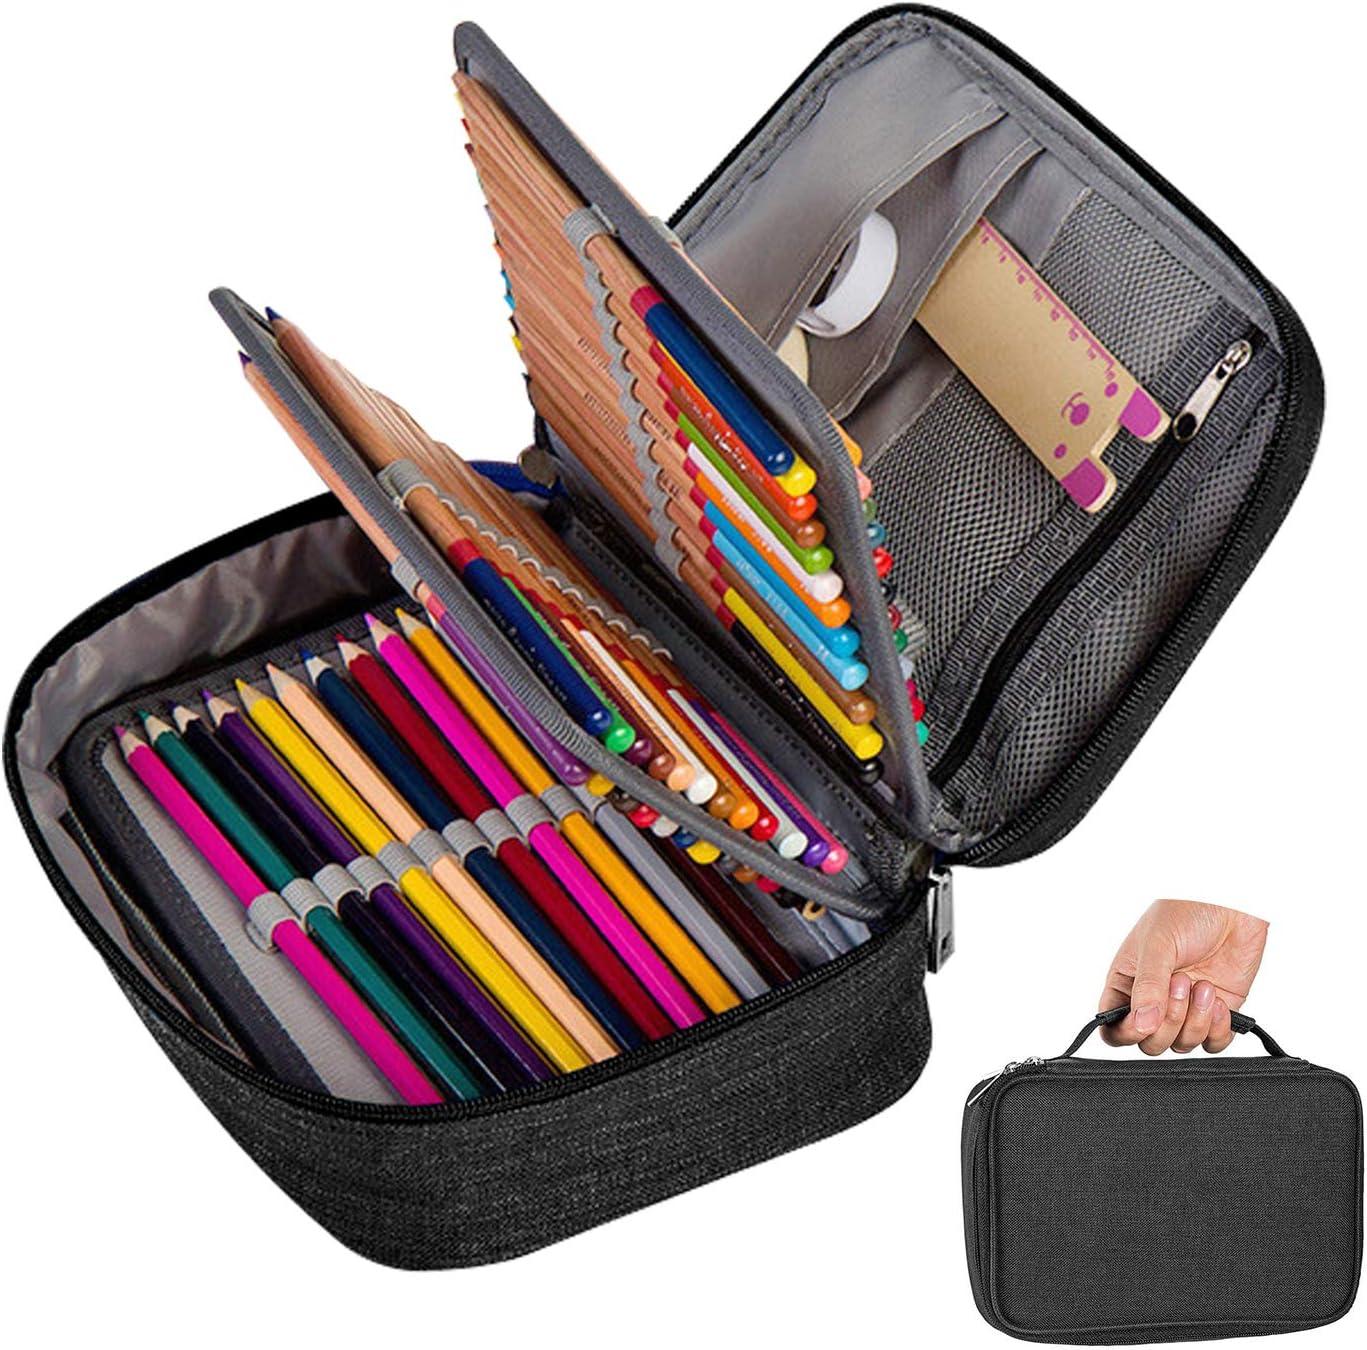 pencil case large capacity 72 packs multifunction pencil bag big capacity pen pouch holder stationery